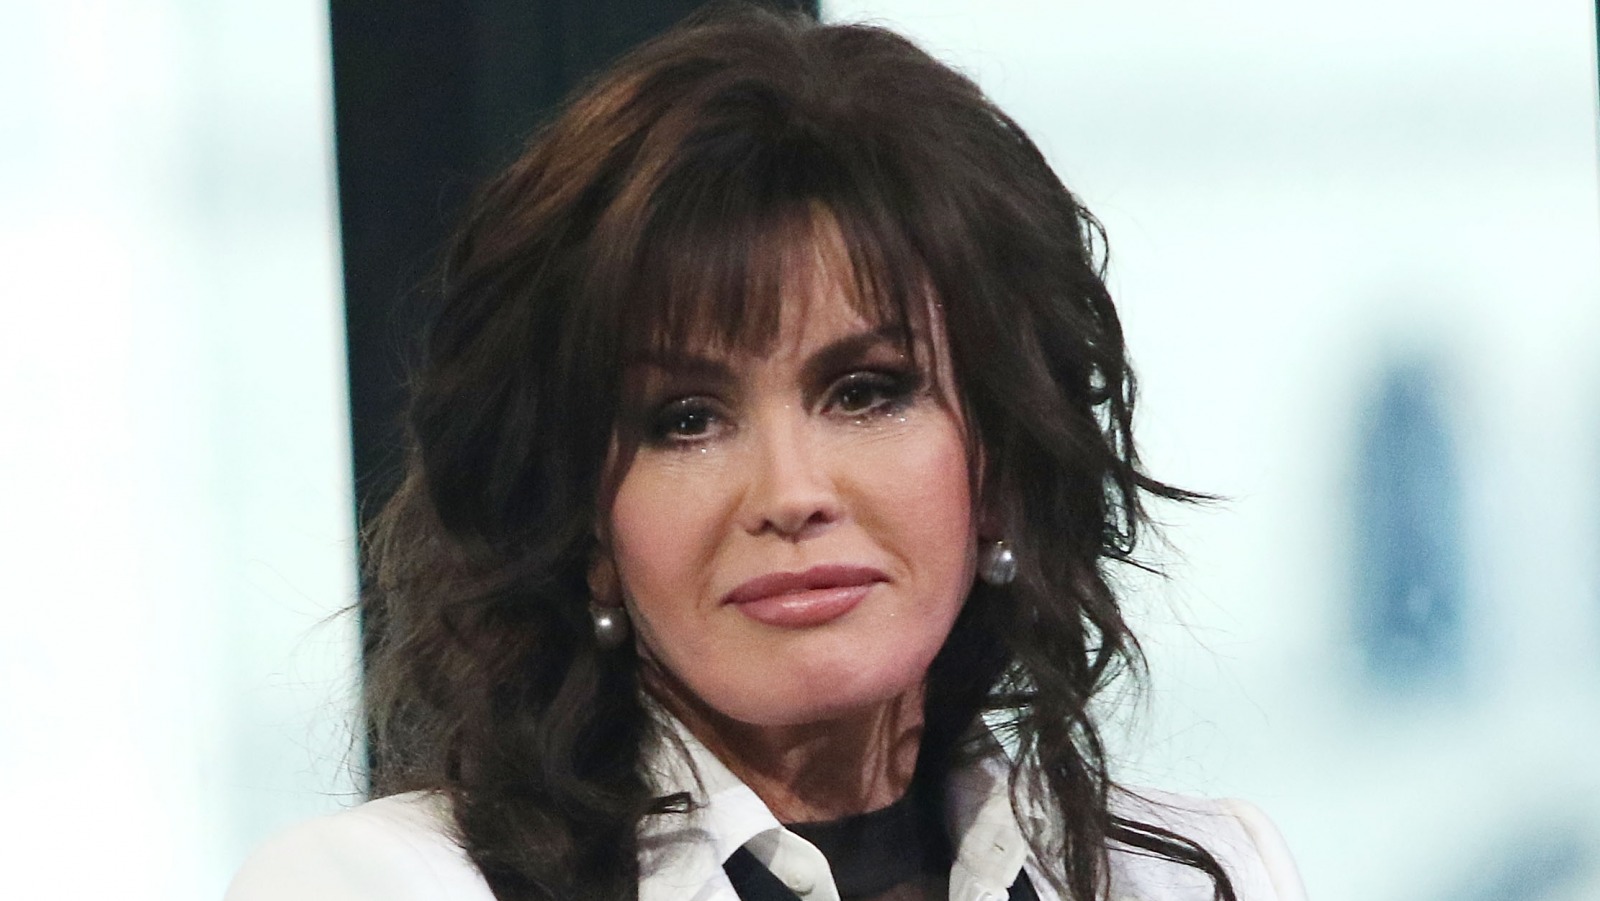 Marie Osmond's Recalls The Tragic Death of Her Son Back in 2010 When He Took His Life at Age 18